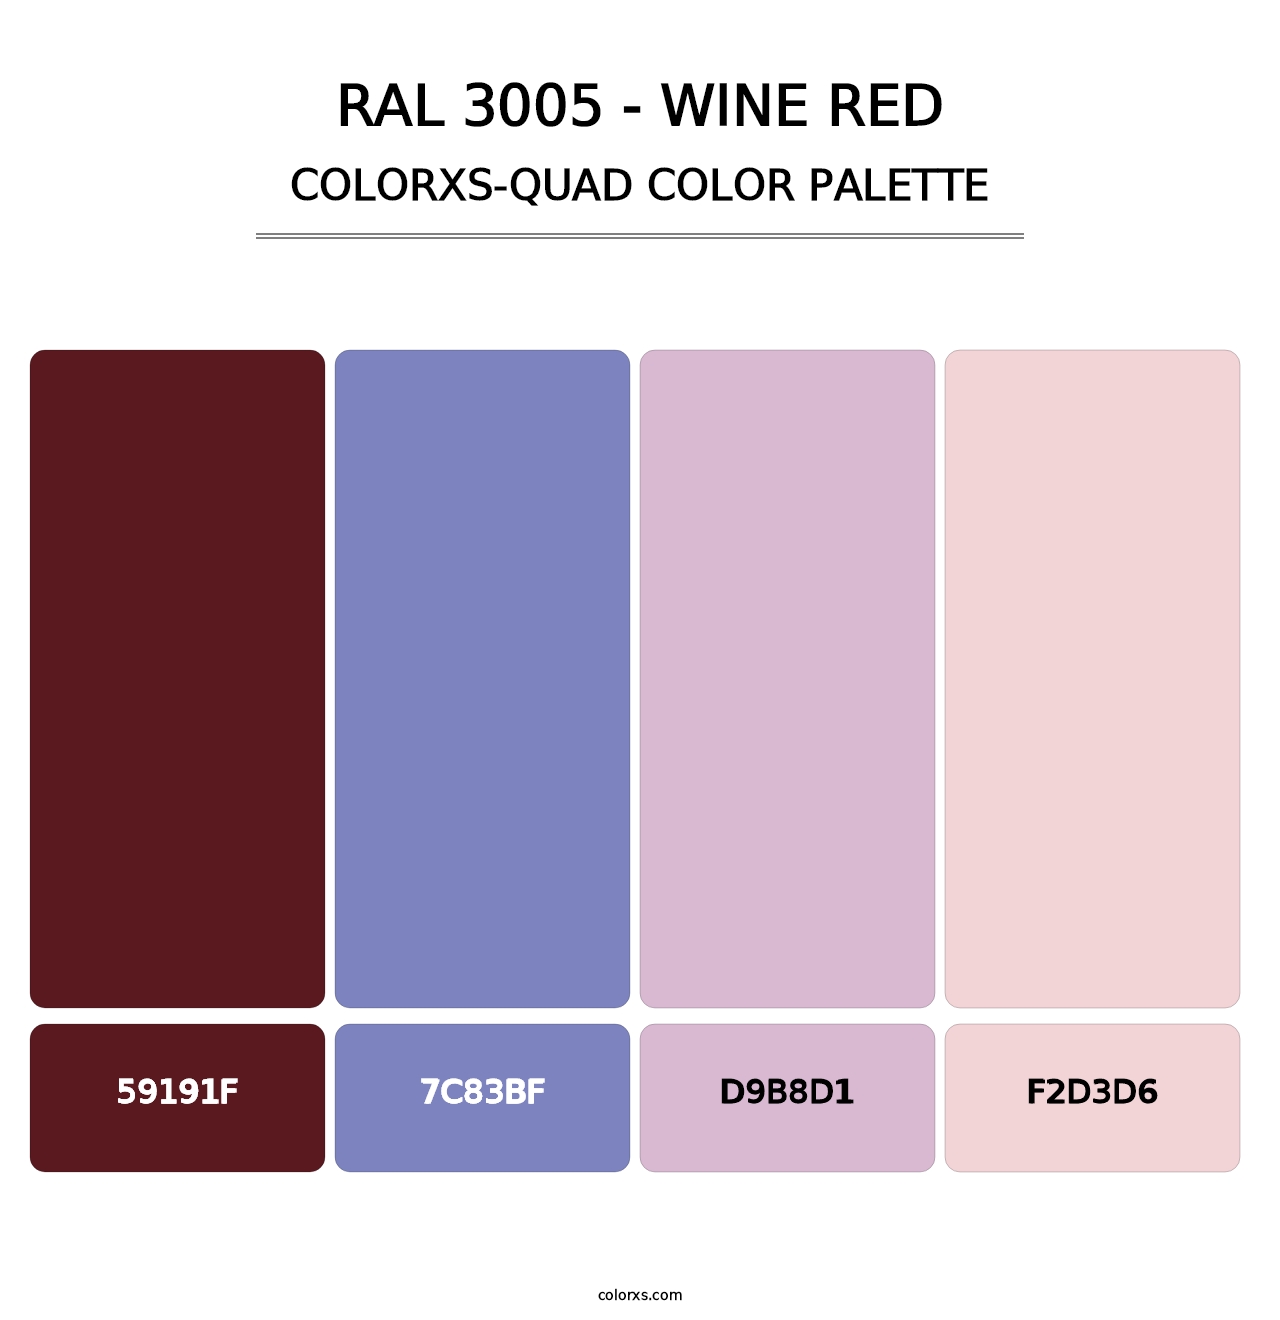 RAL 3005 - Wine Red - Colorxs Quad Palette